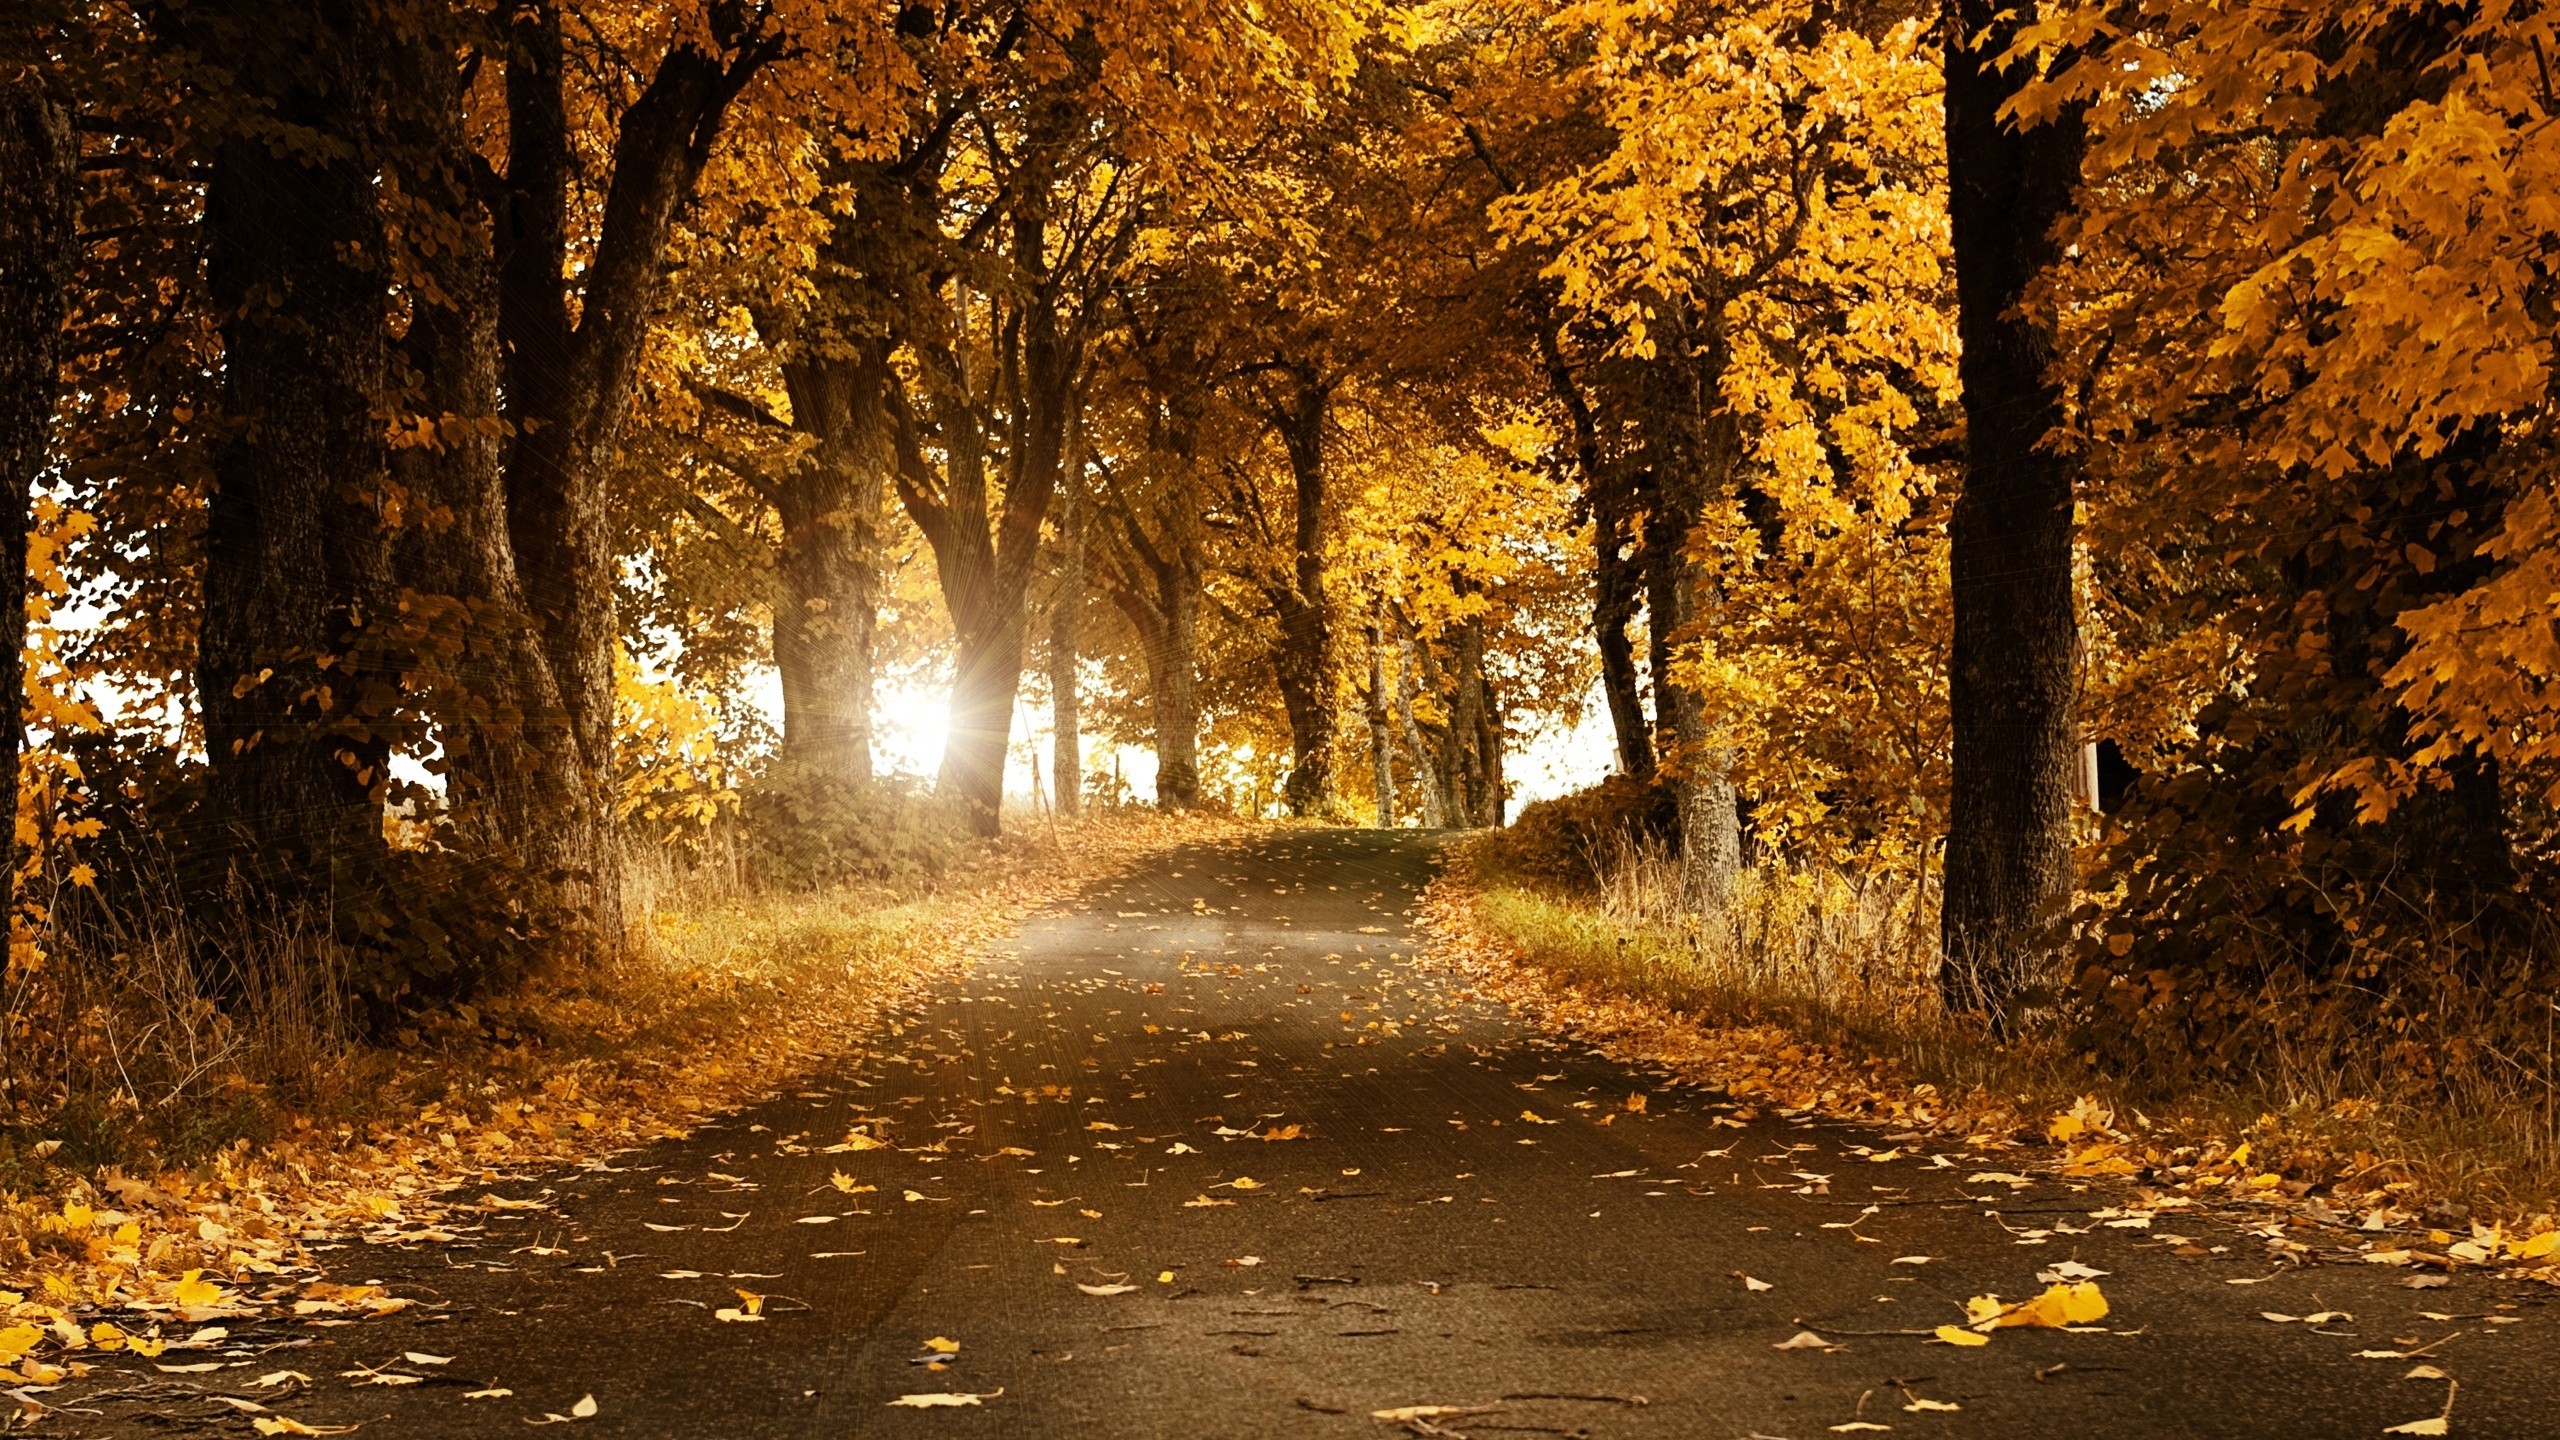 General 2560x1440 leaves trees road sunlight street outdoors